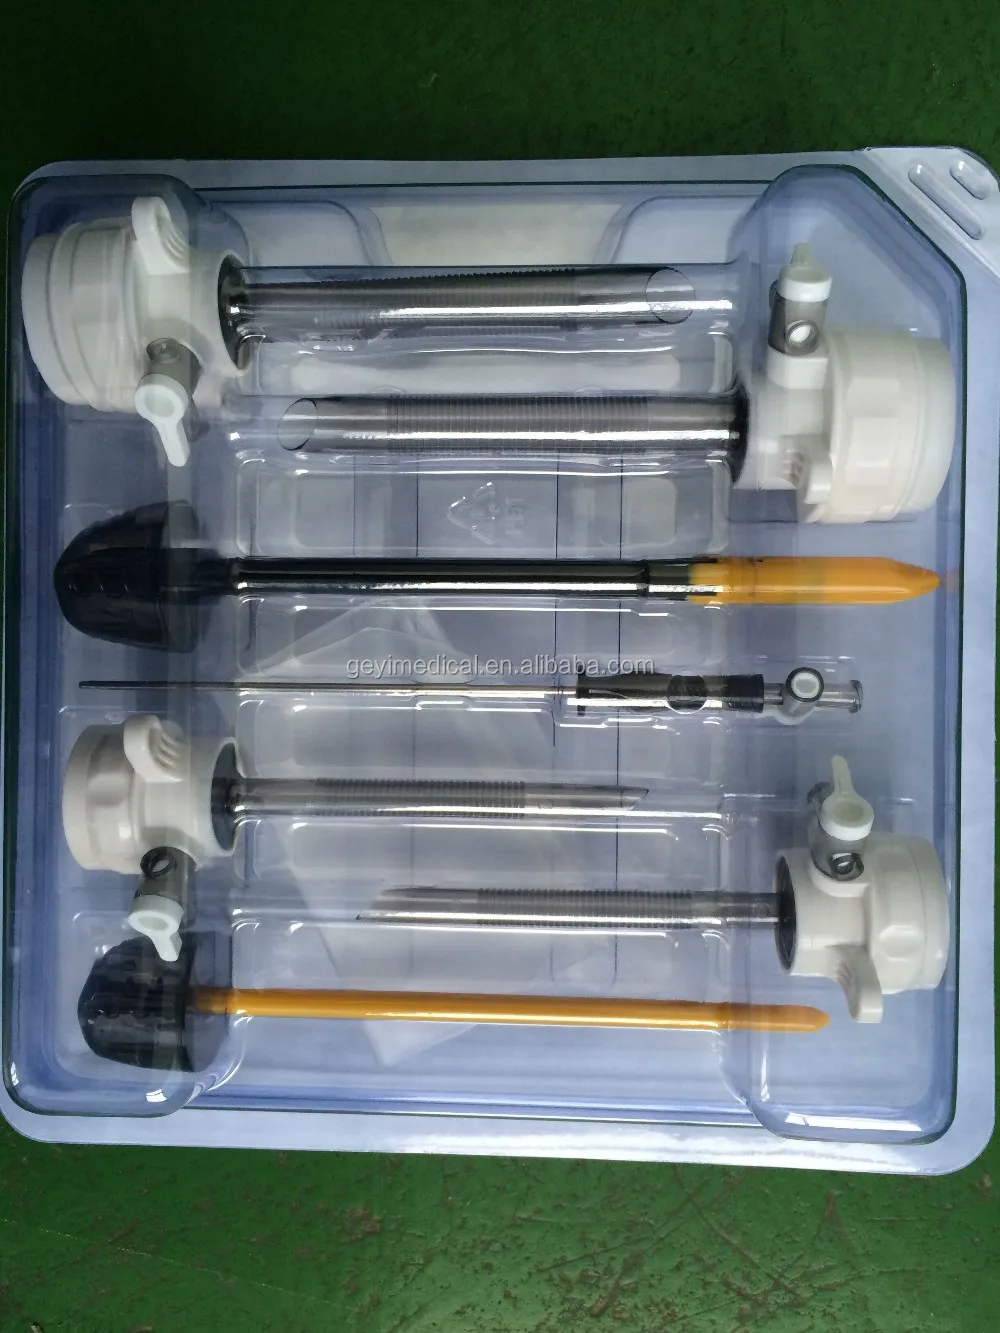 
medical instrument trocar with blade for single use 